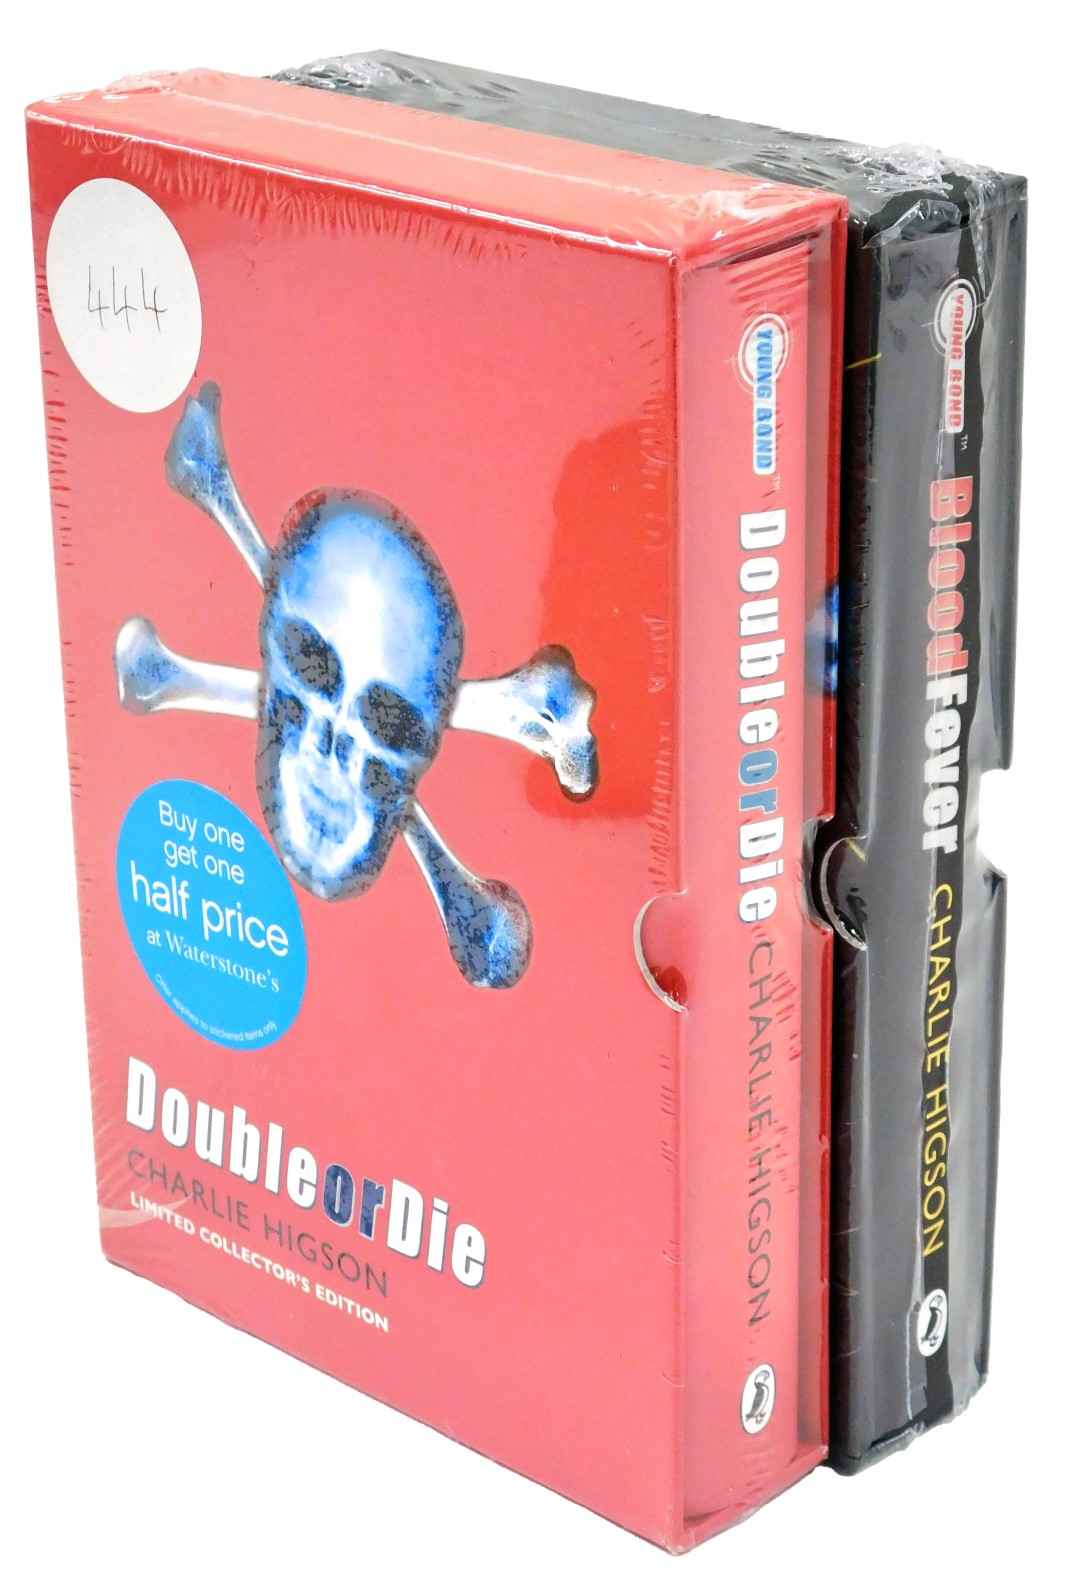 Higson (Charlie). James Bond, two hardback editions, comprising Double or Die (limited collectors ed